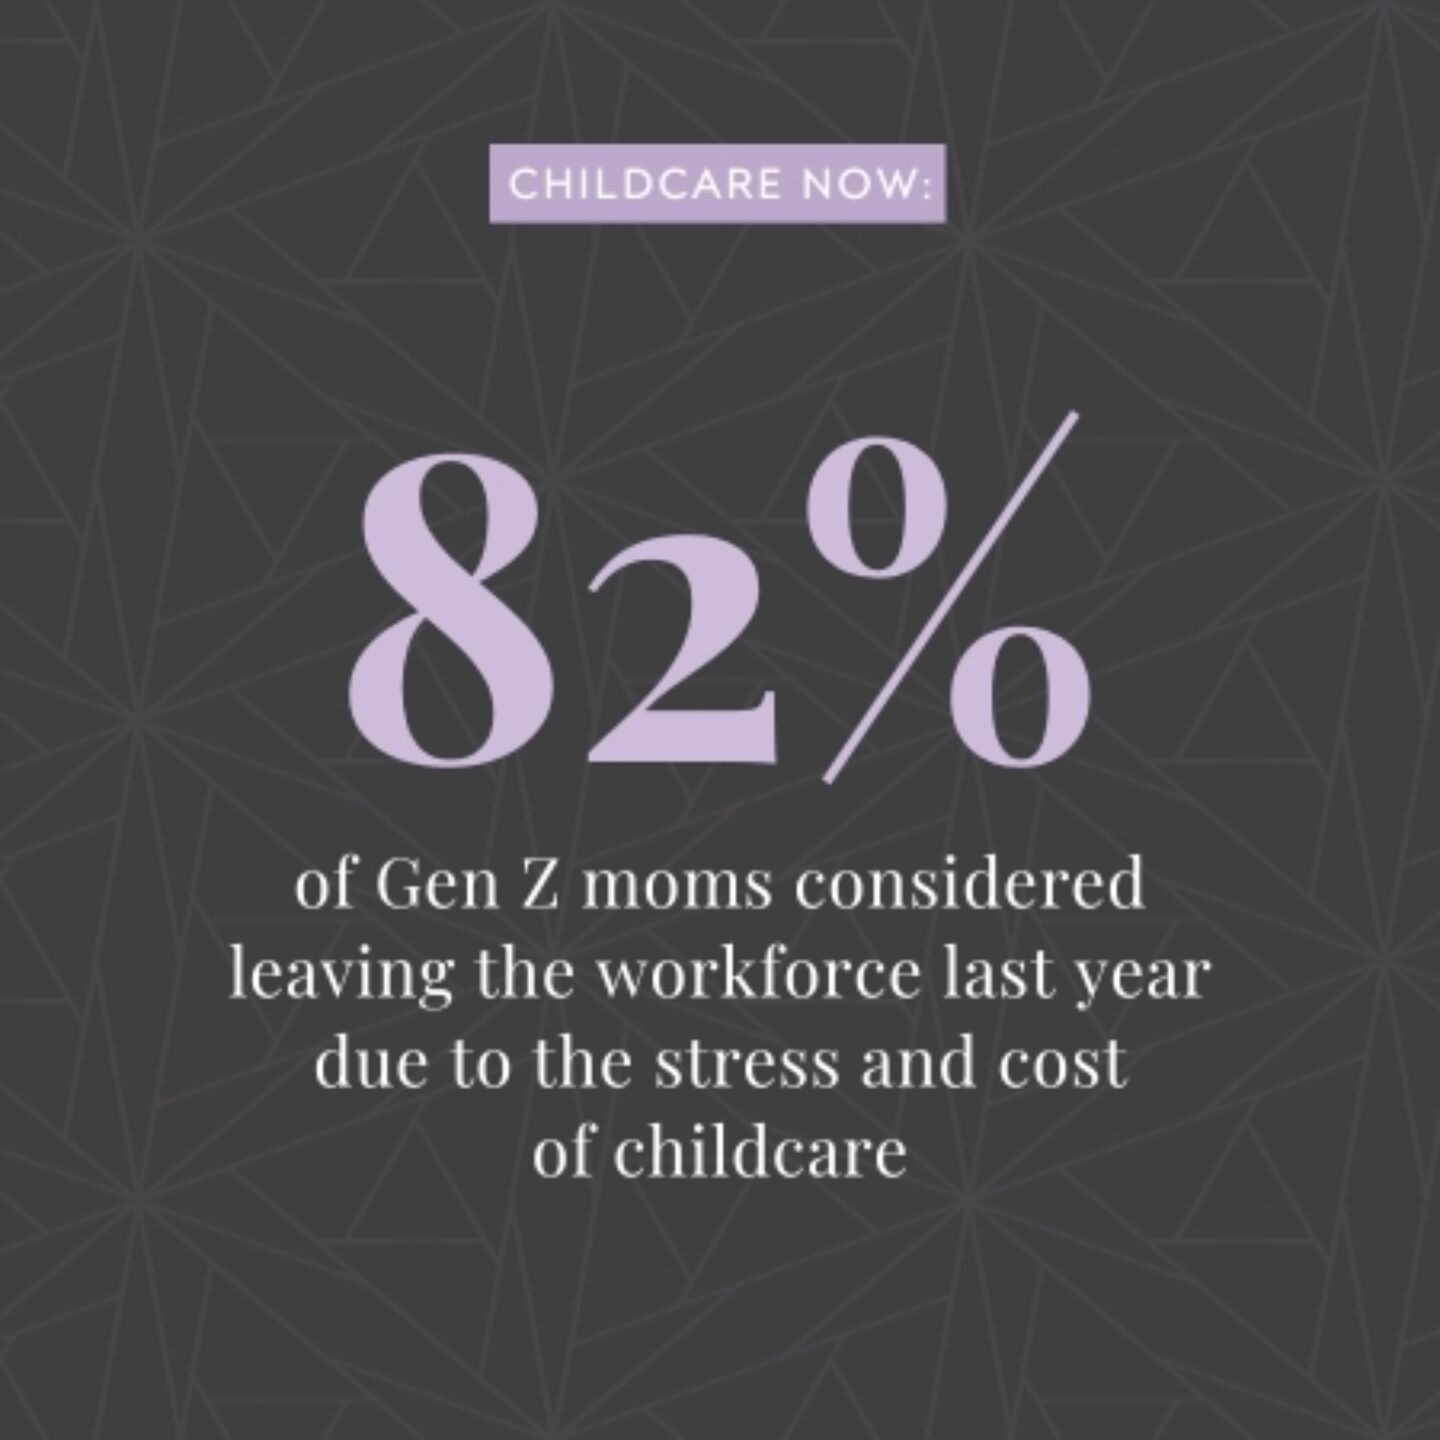 Two-thirds of moms considered leaving the workforce last year due to the stress and cost of childcare, highest among Gen Z at 82% - State of Motherhood